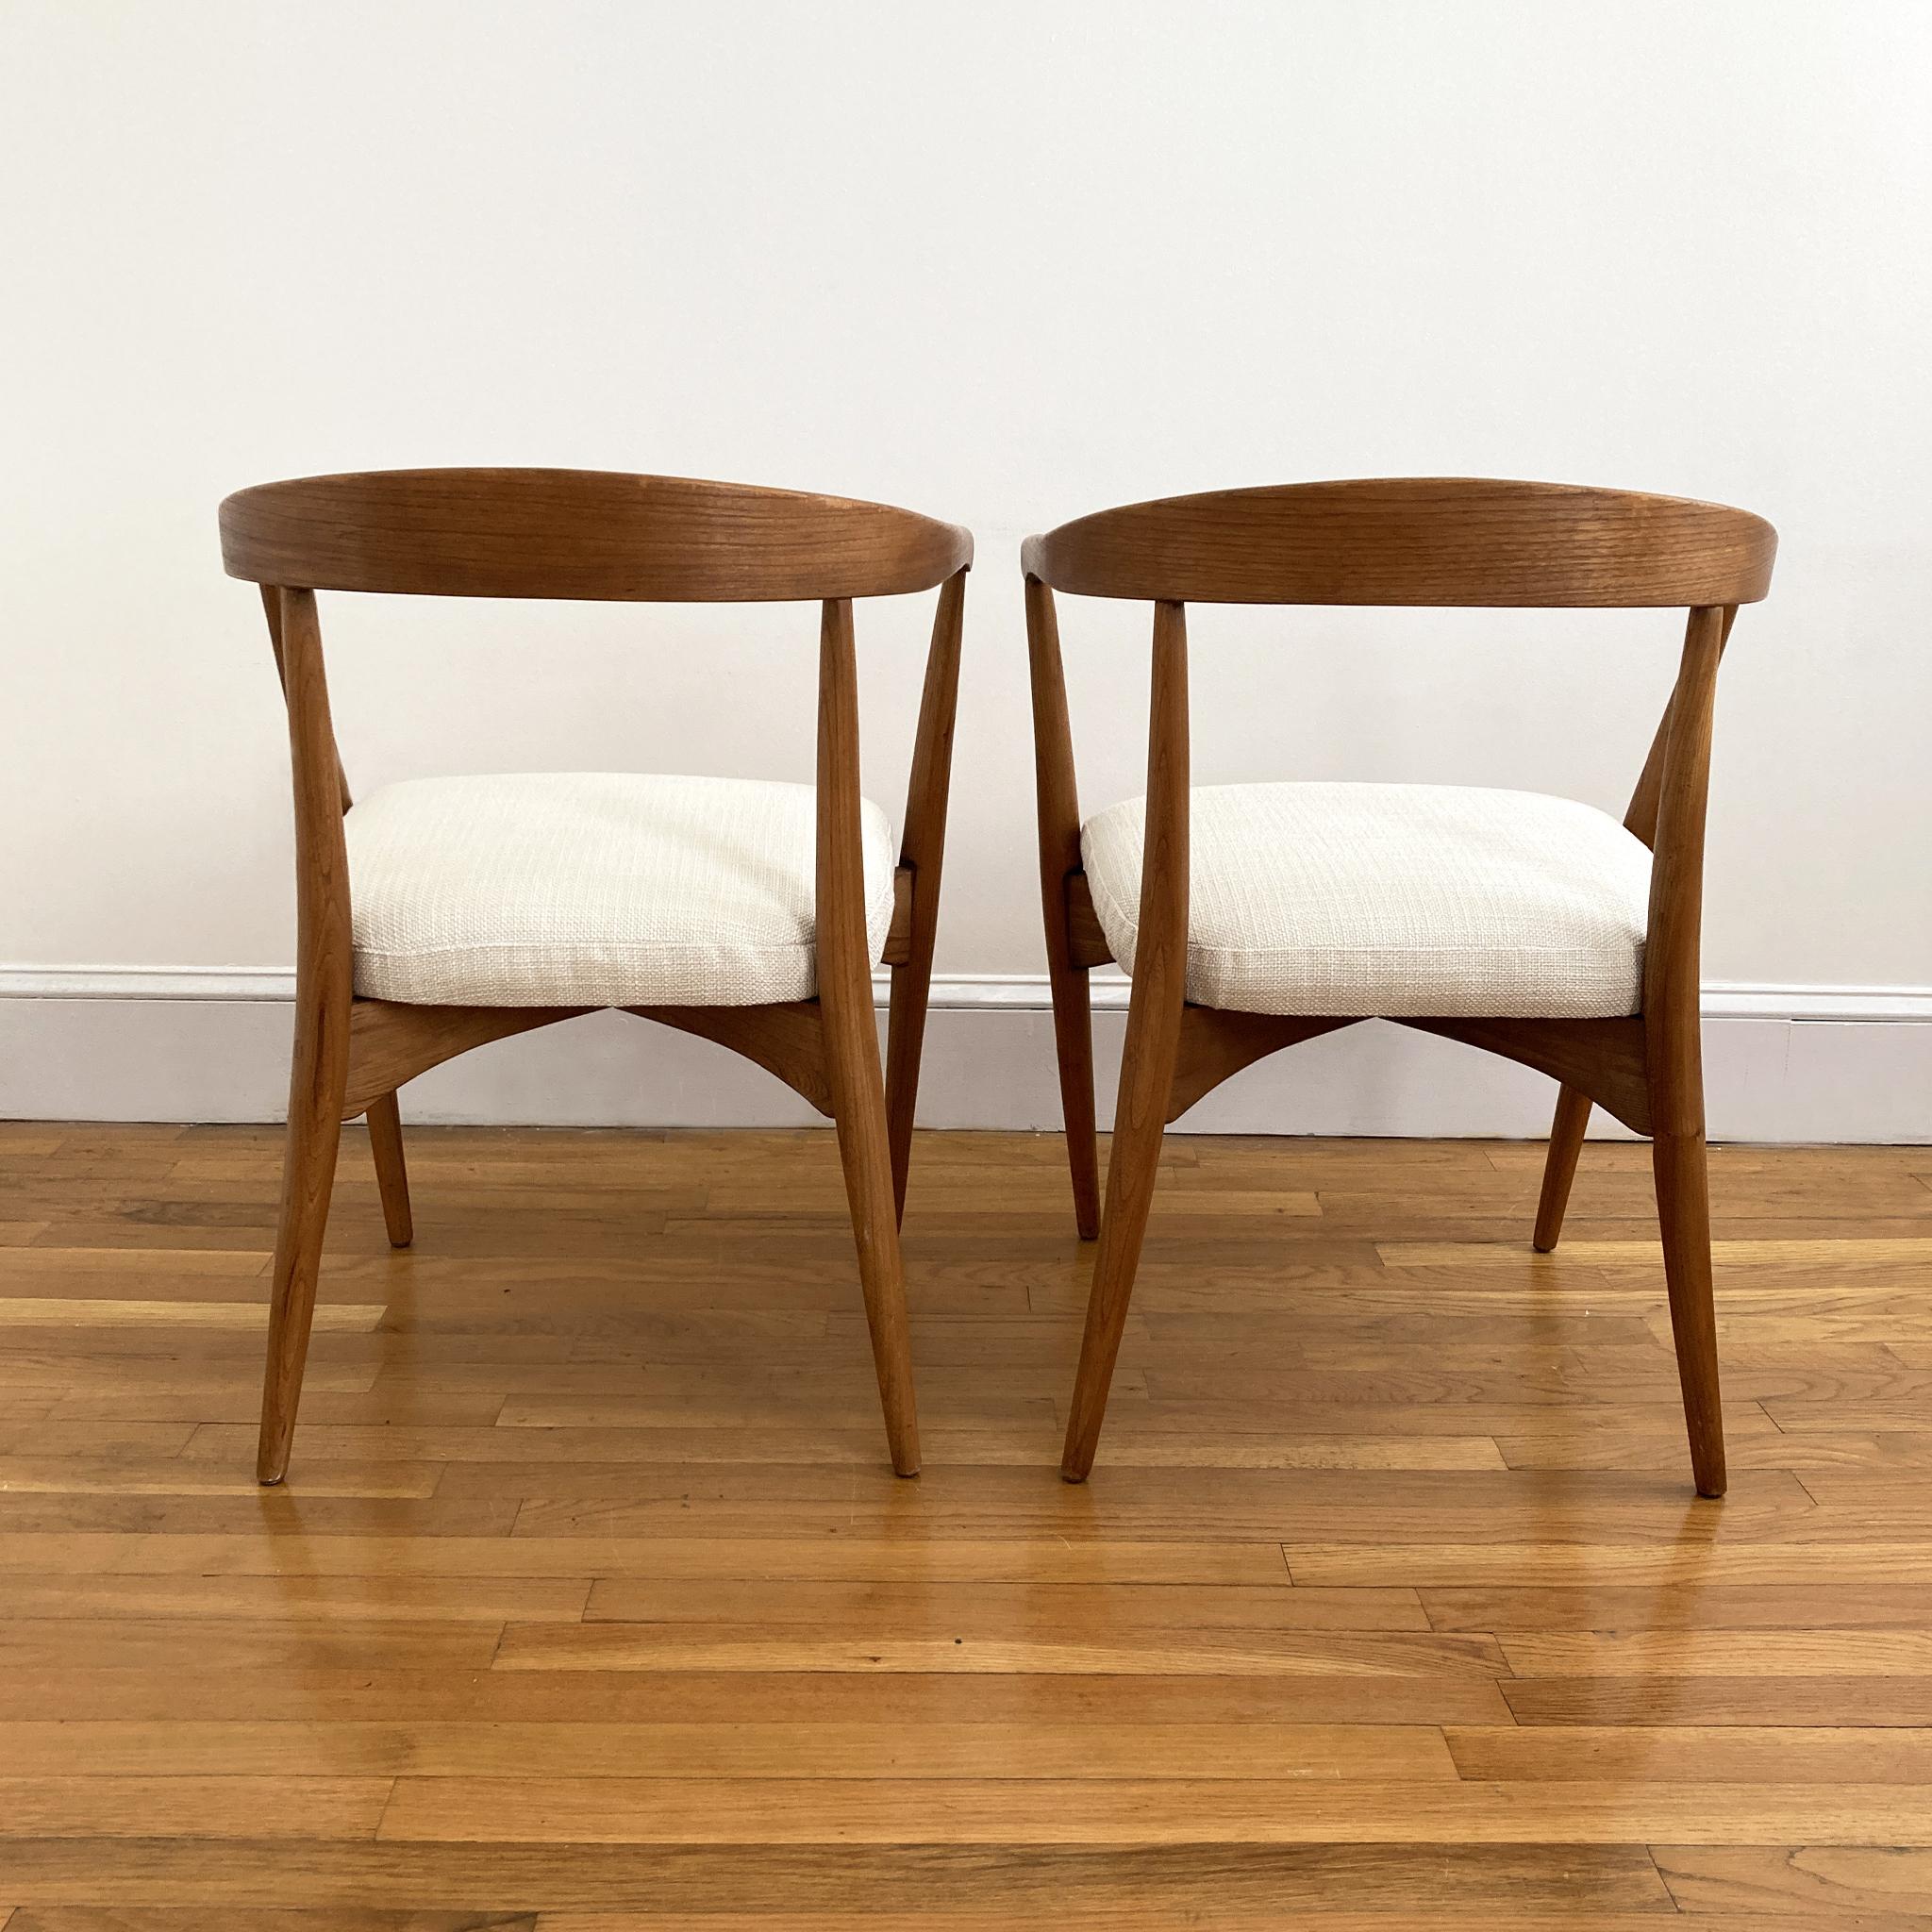 American Pair of 1960's Lawrence Peabody for Nemschoff Midcentury Chairs Reupholstered